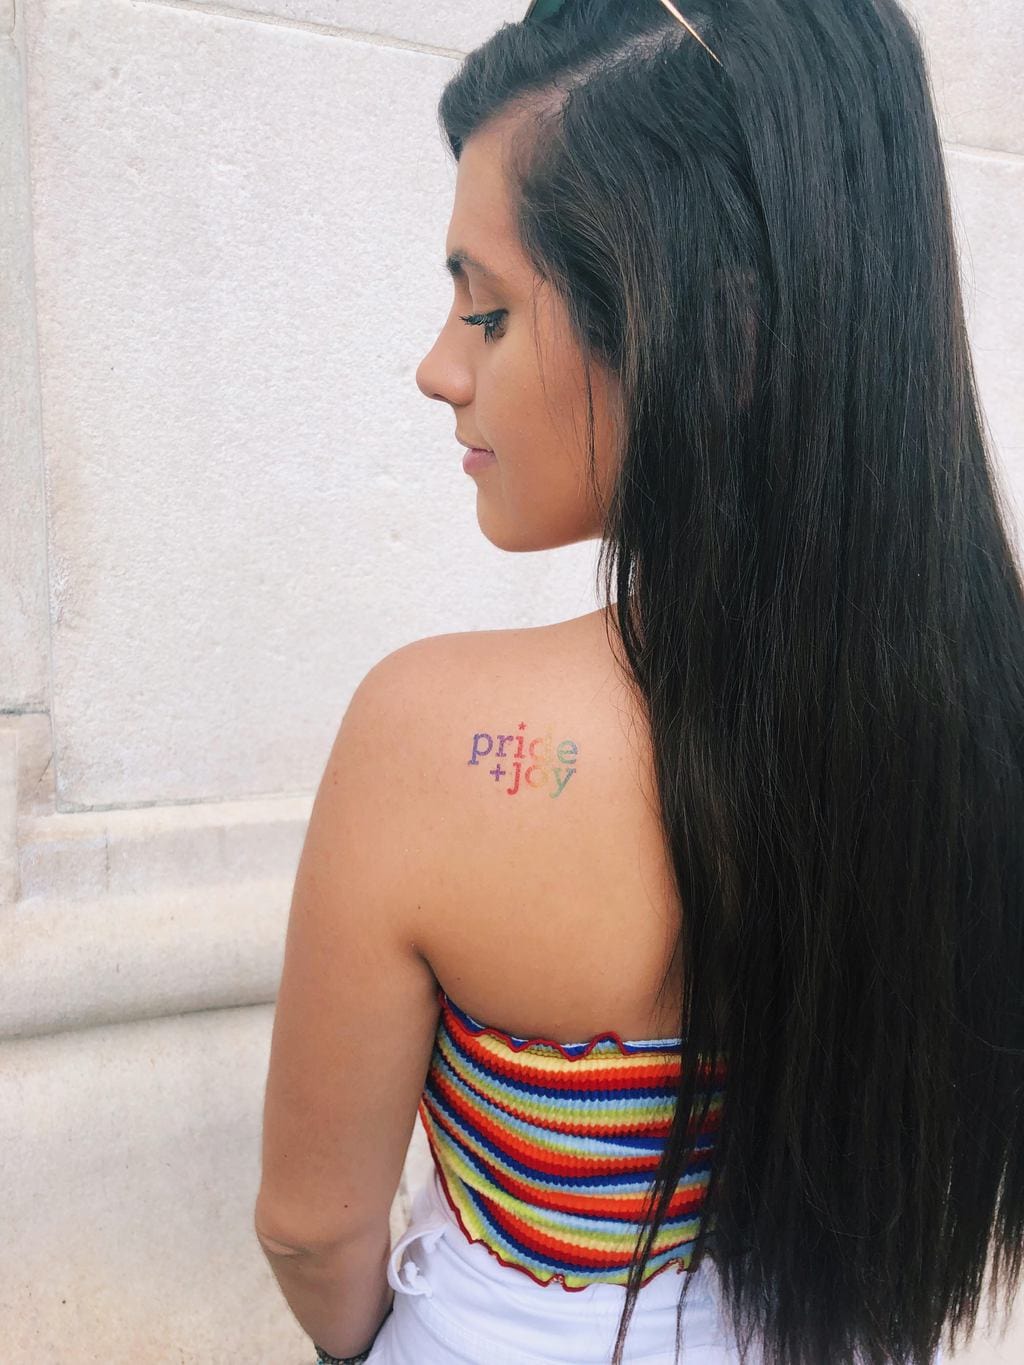 Girl with a Pride tattoo